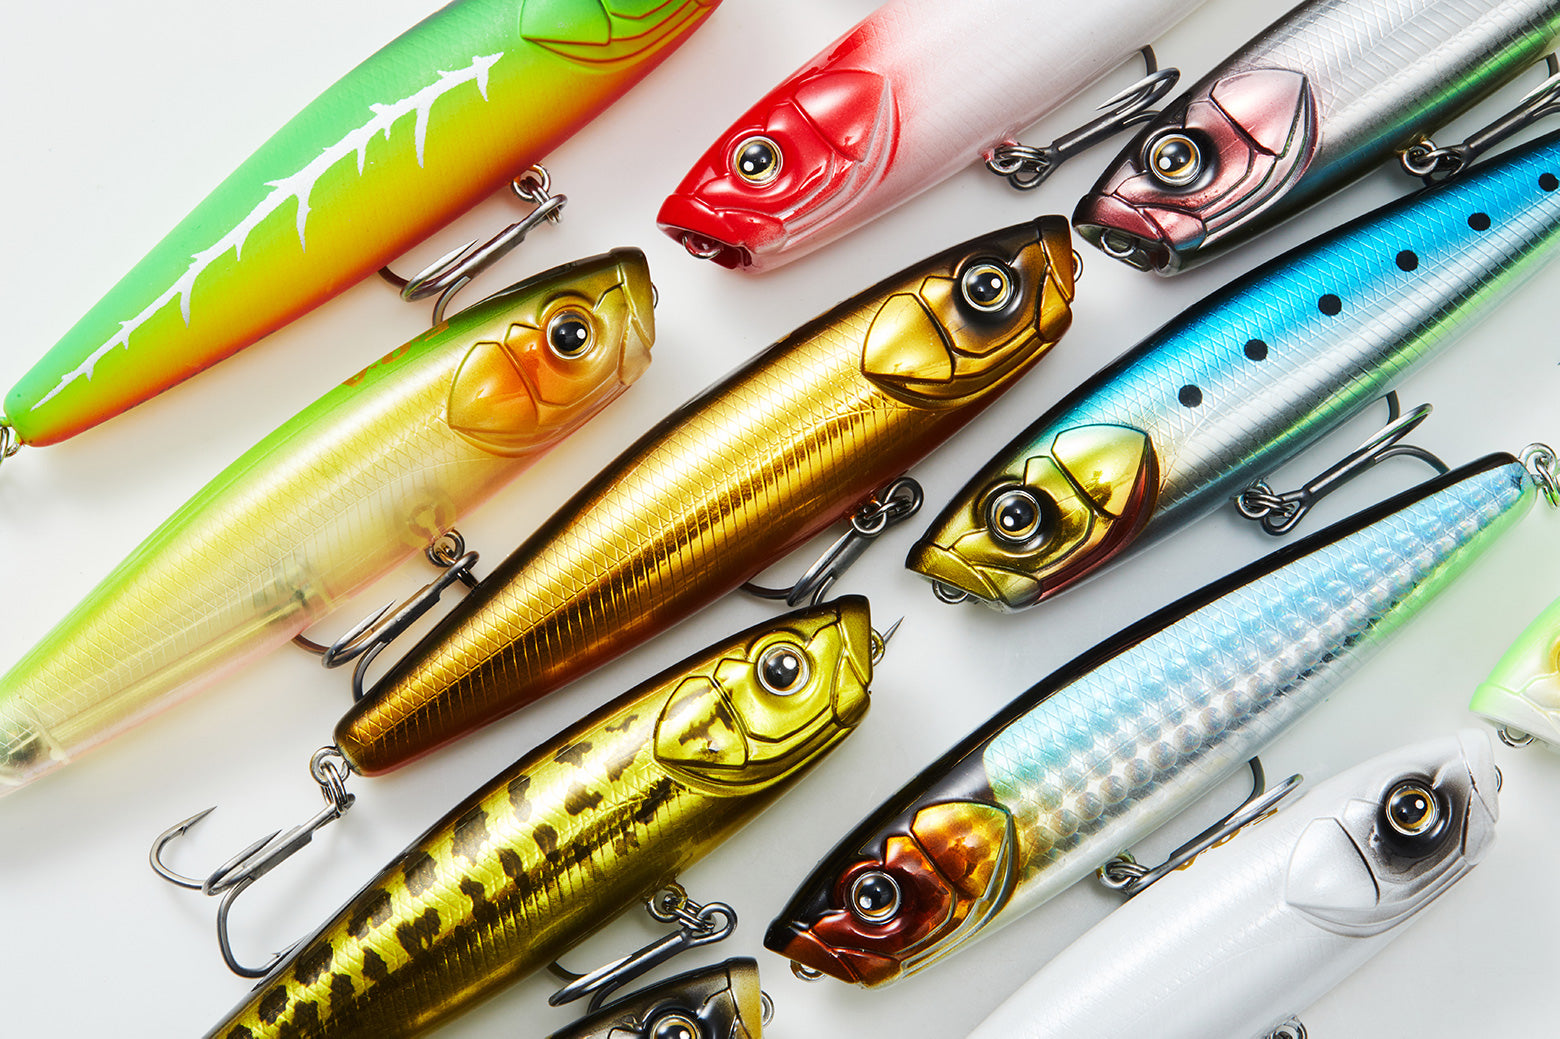 Fishing Weights in Fishing Tackle